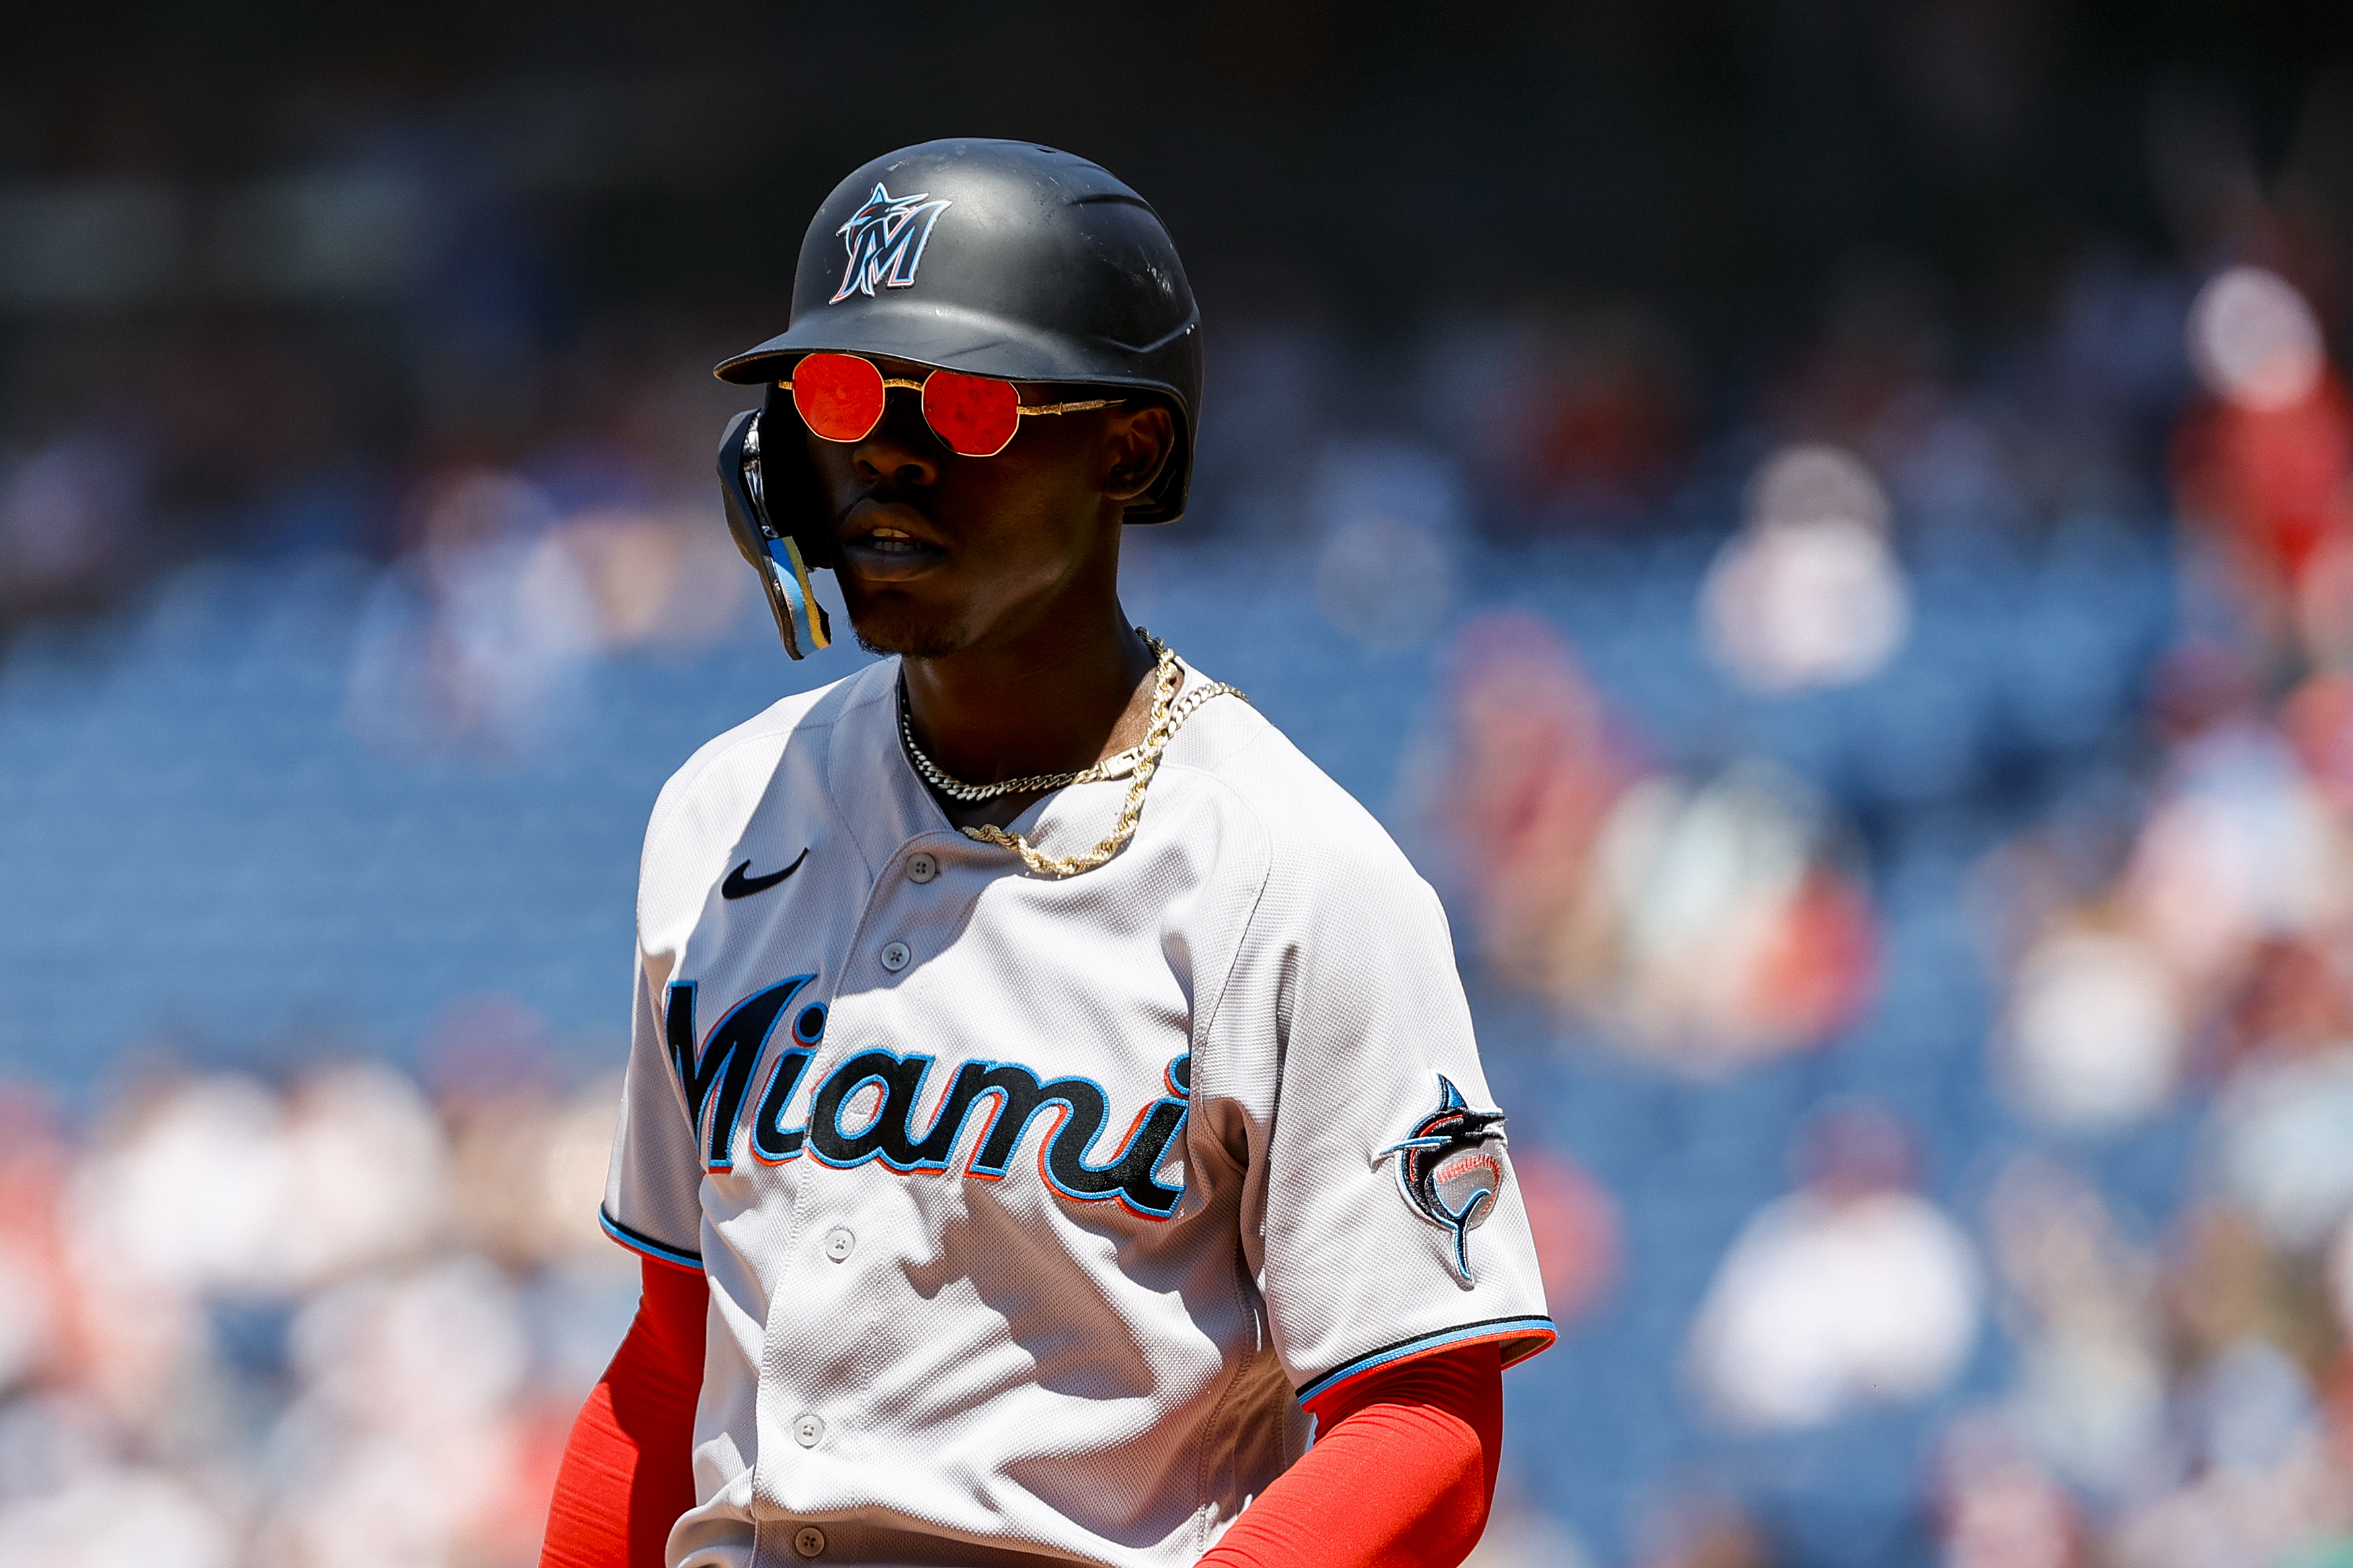 Jazz Chisholm Jr. #2 of the Miami Marlins looks on during the fifth inning against the Philadelphia Phillies at Citizens Bank Park on June 15, 2022 in Philadelphia, Pennsylvania.